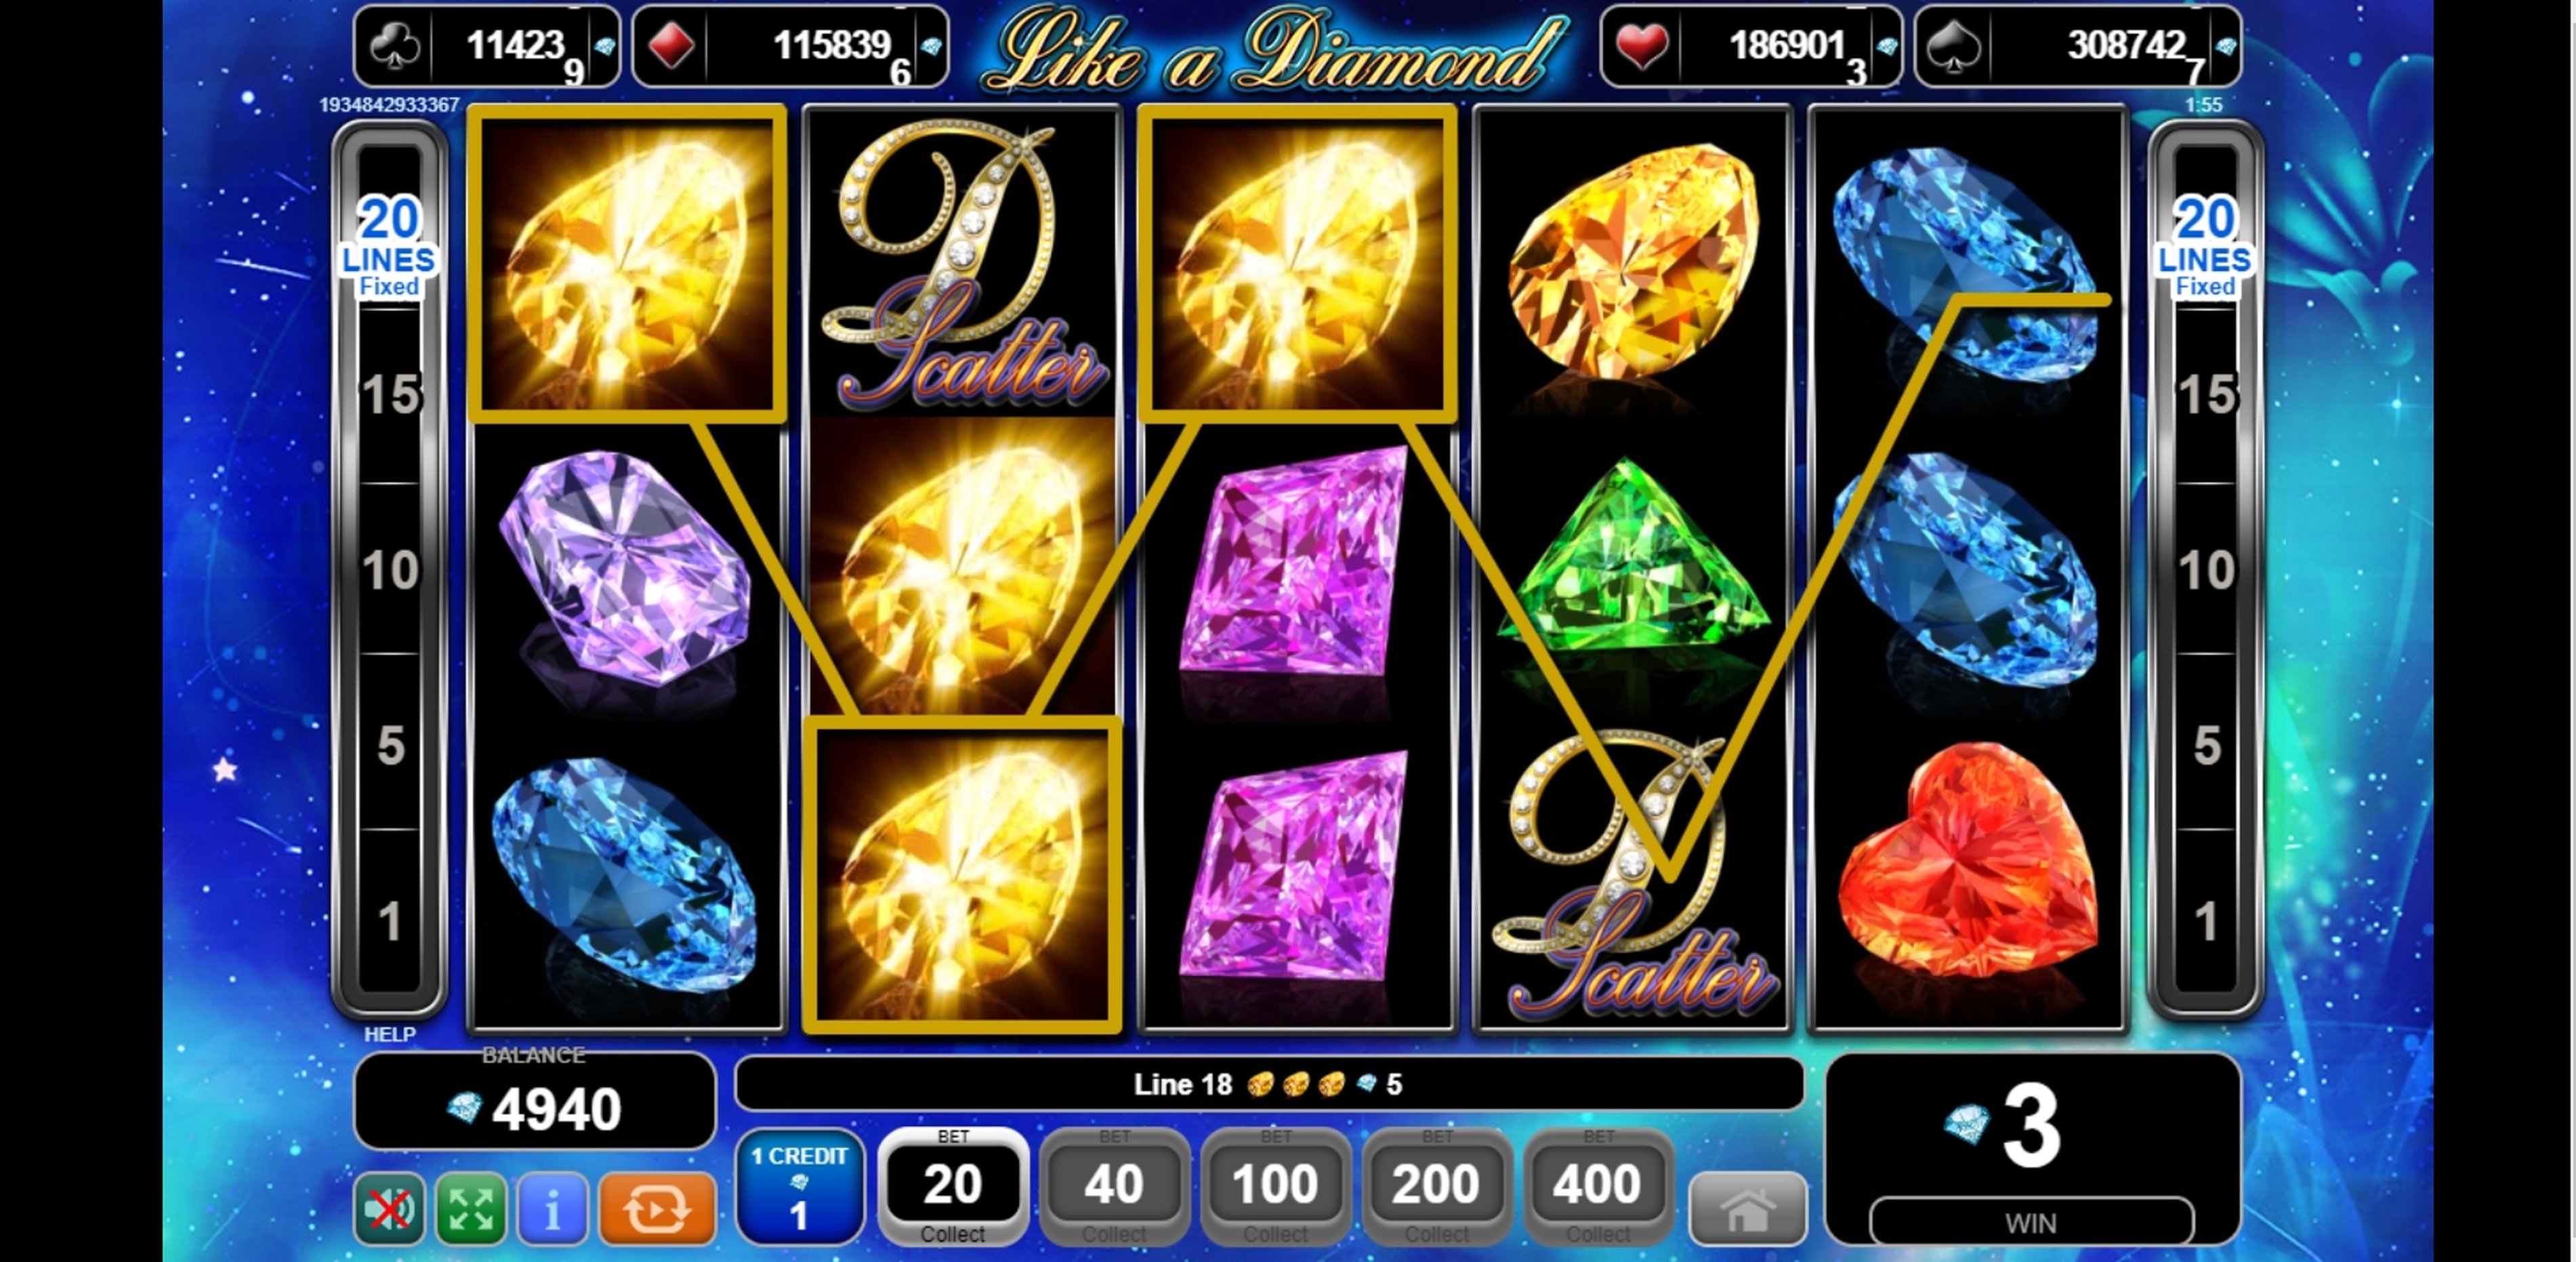 Win Money in Like a Diamond Free Slot Game by EGT